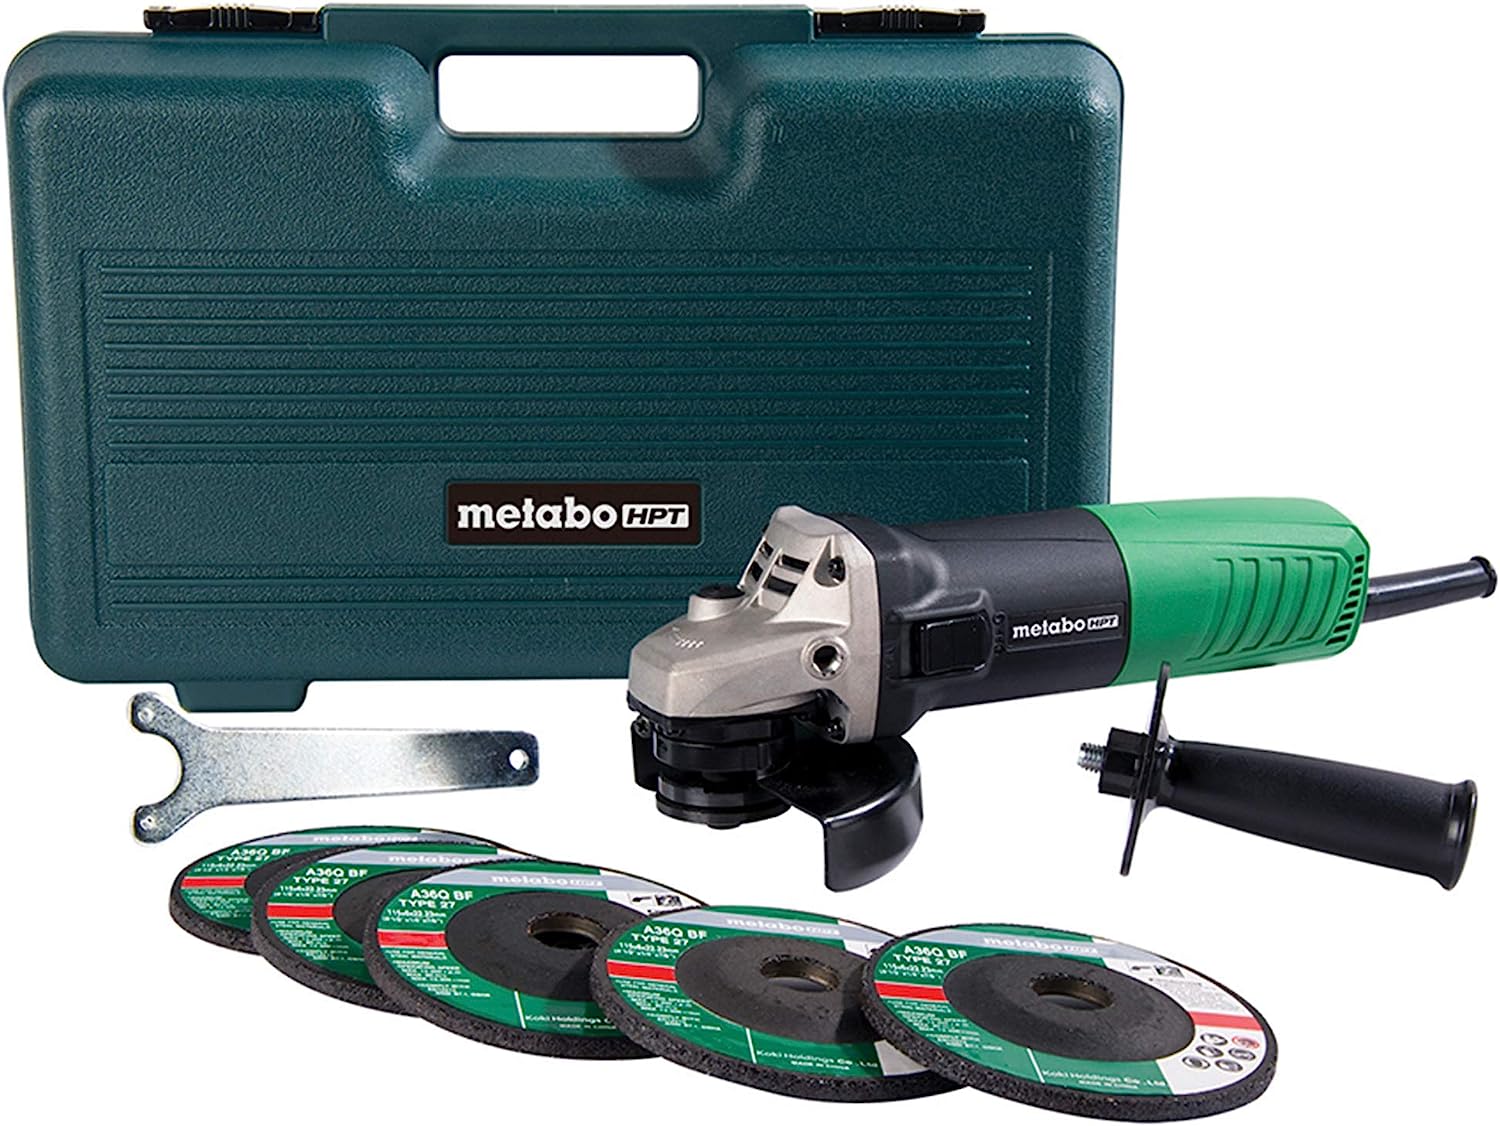 Metabo HPT Angle Grinder | 4-1/2-Inch | Includes 5 [...]